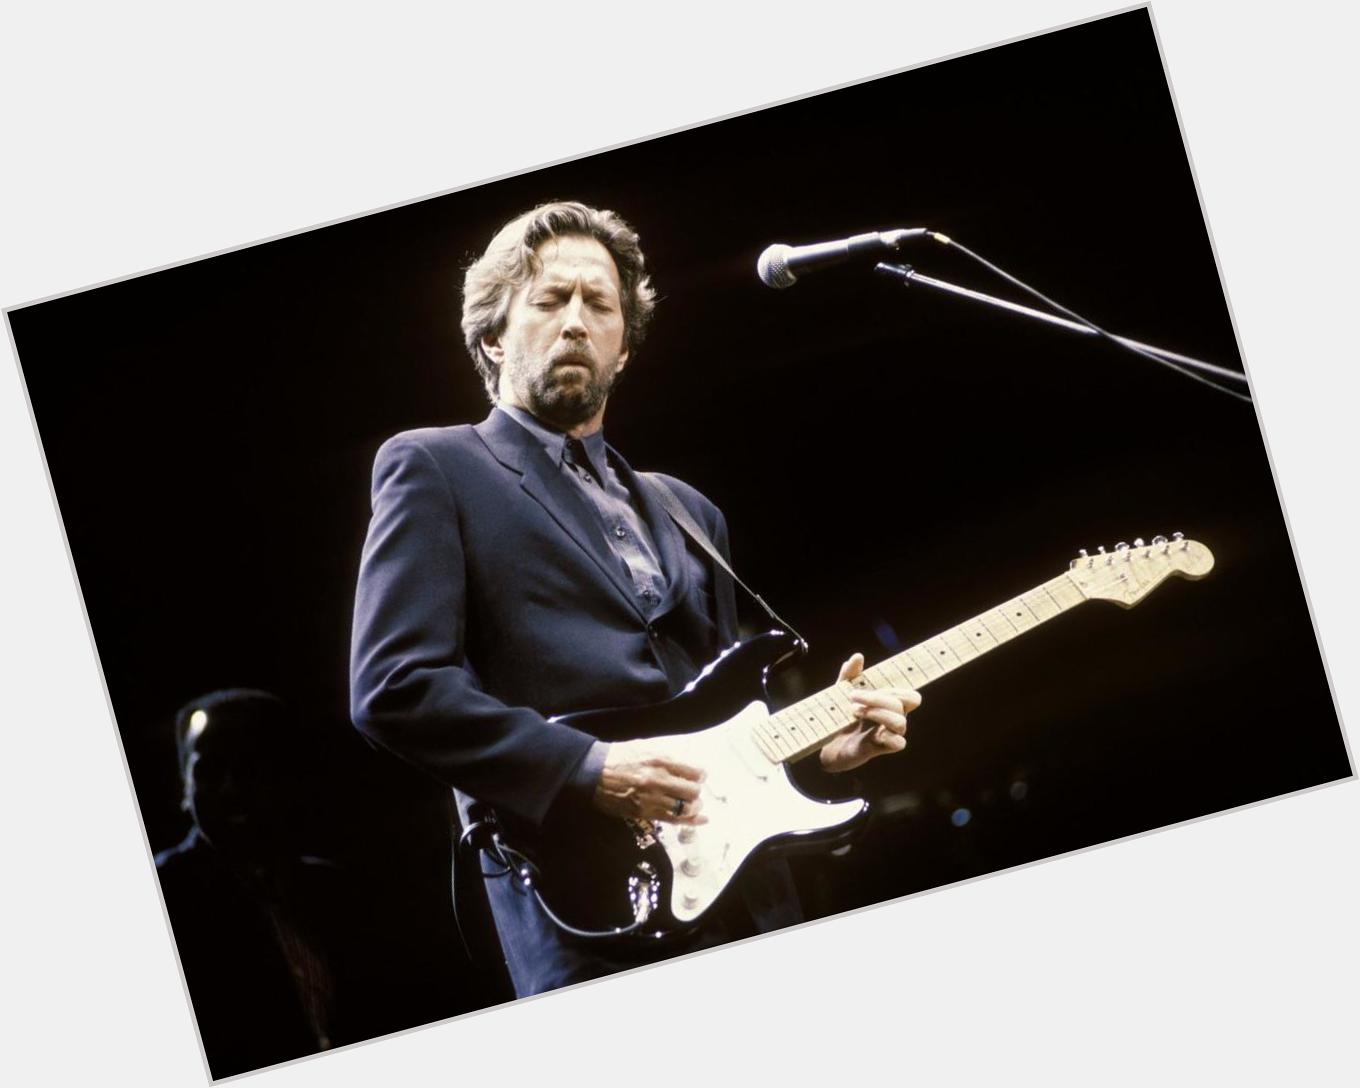 Happy 70th birthday to one of the true living legends of the guitar, Eric Clapton! Thanks for all the music. 